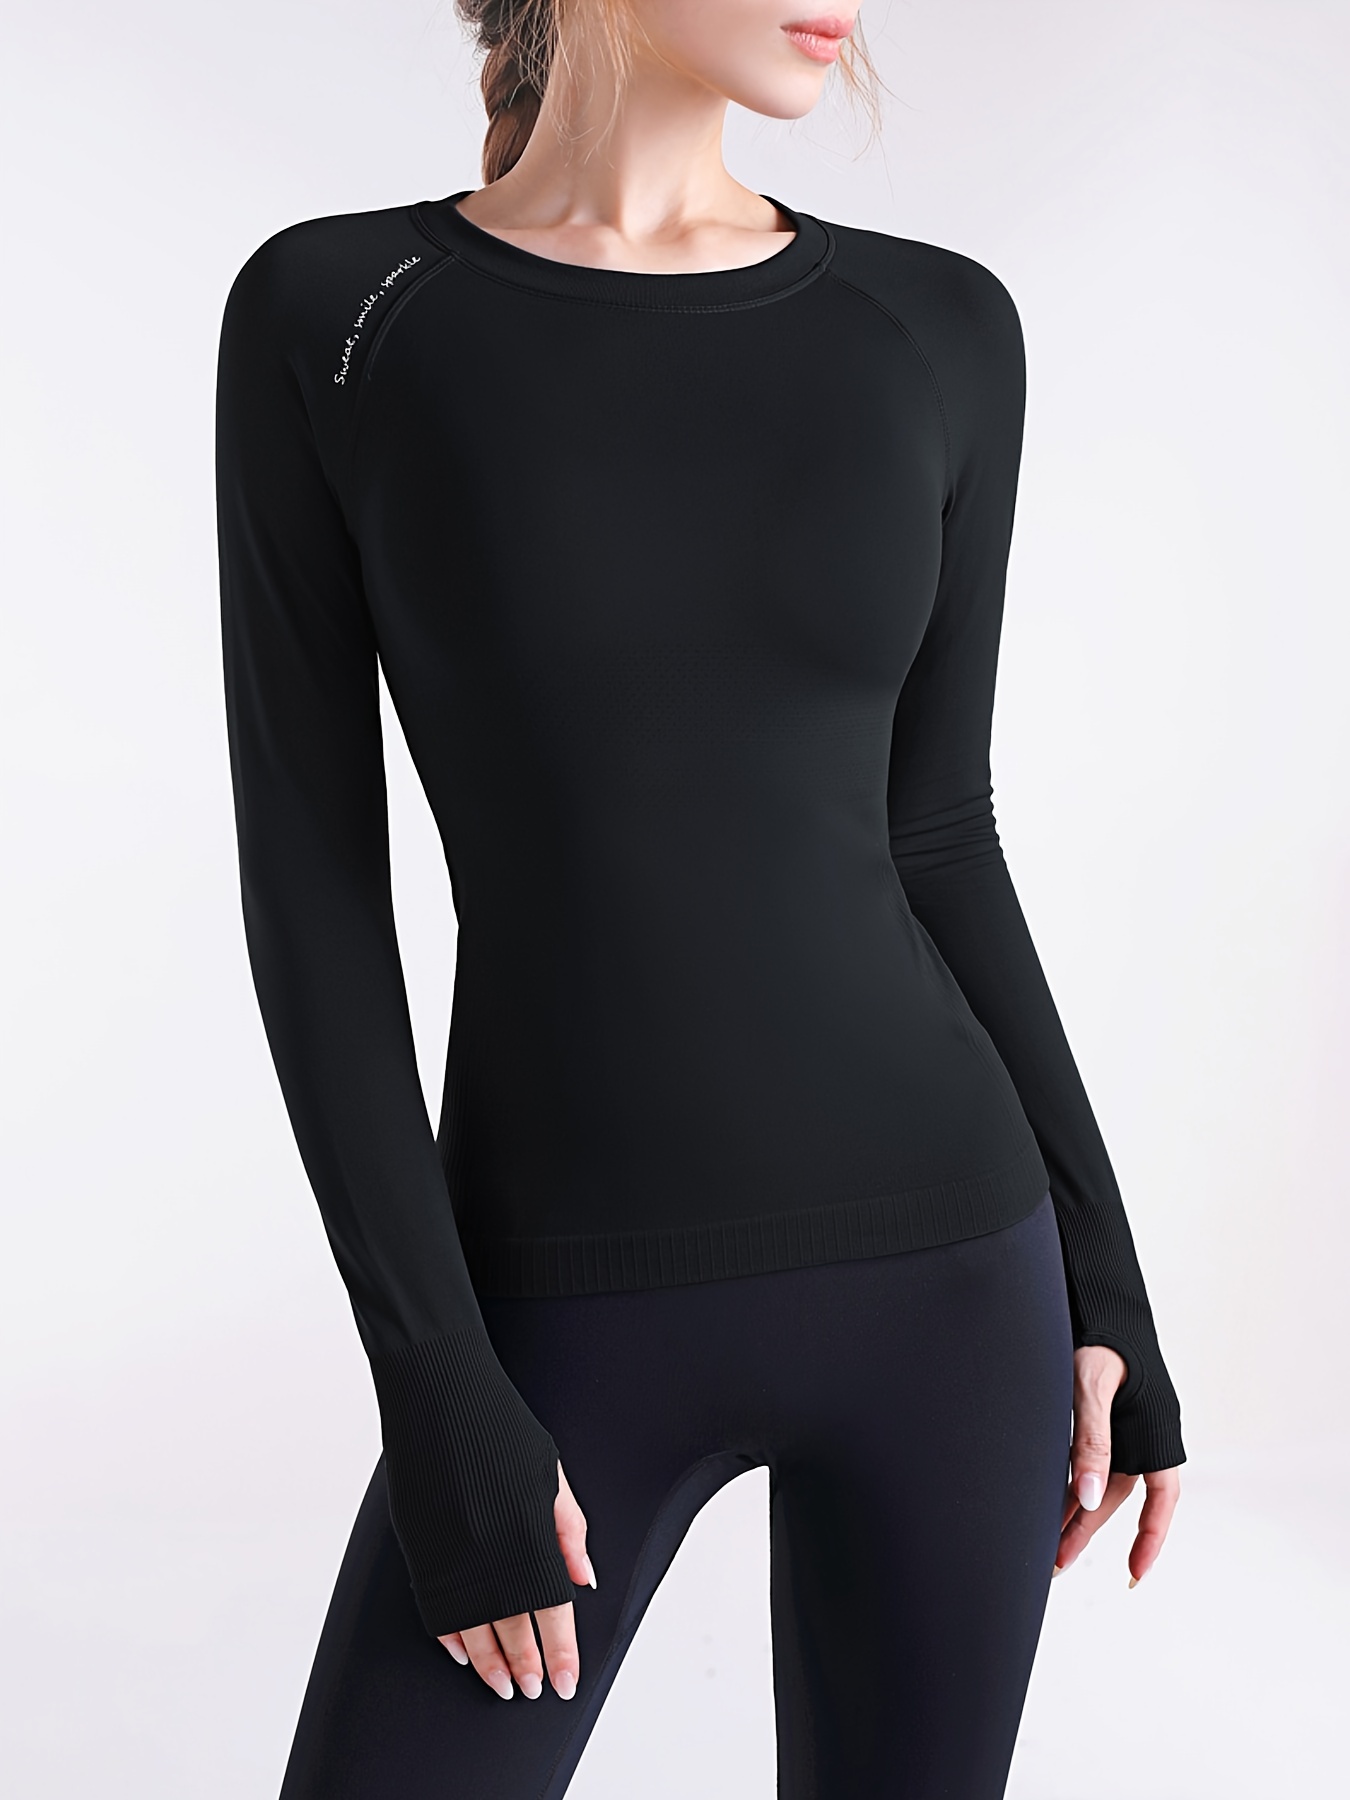 Seamless Workout Yoga Shirts for Women Activewear Dry-Fit Long Sleeve  Breathable T-Shirts Mesh Breathable Crew Neck Stretch Yoga Sport Tops  Athletic Shirts 